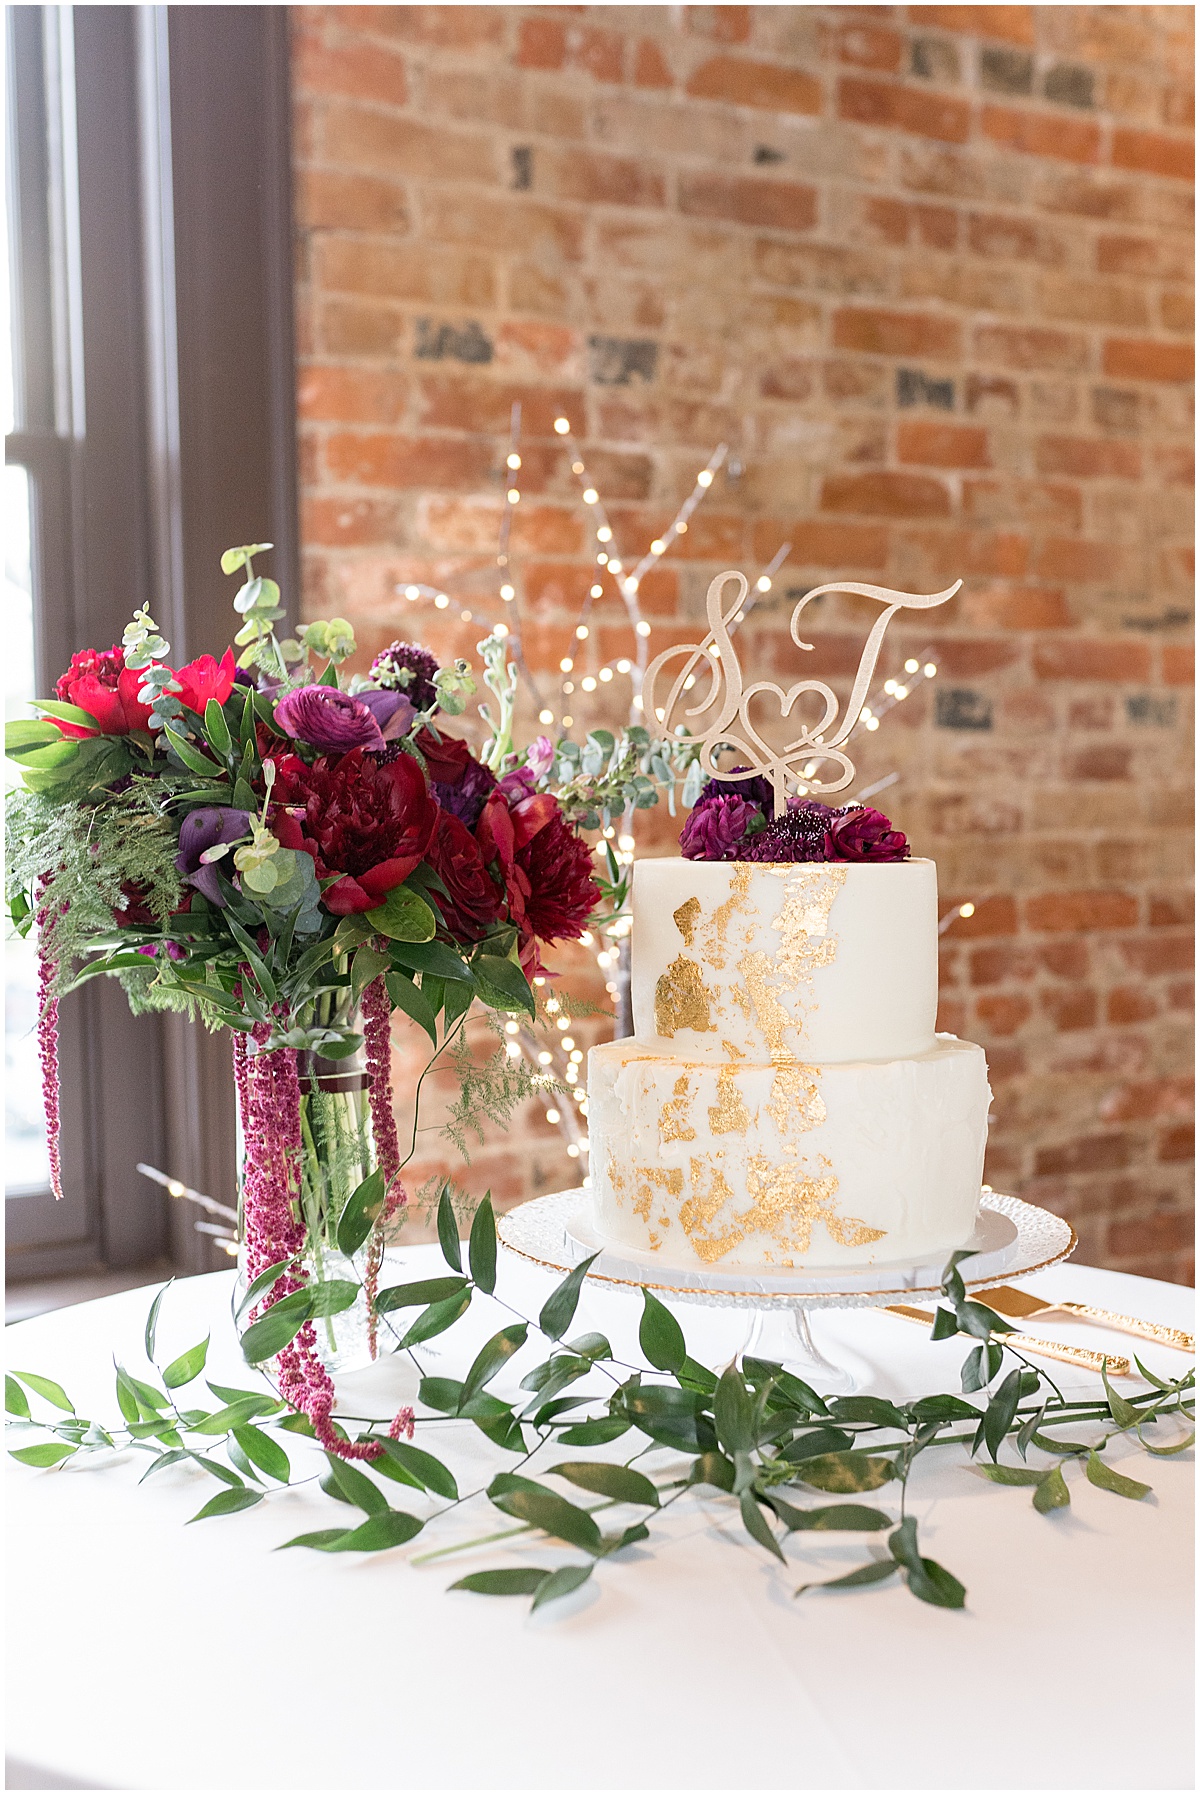 Wedding cake and bouquet for Historic Saint Joseph Hall wedding in Indianapolis